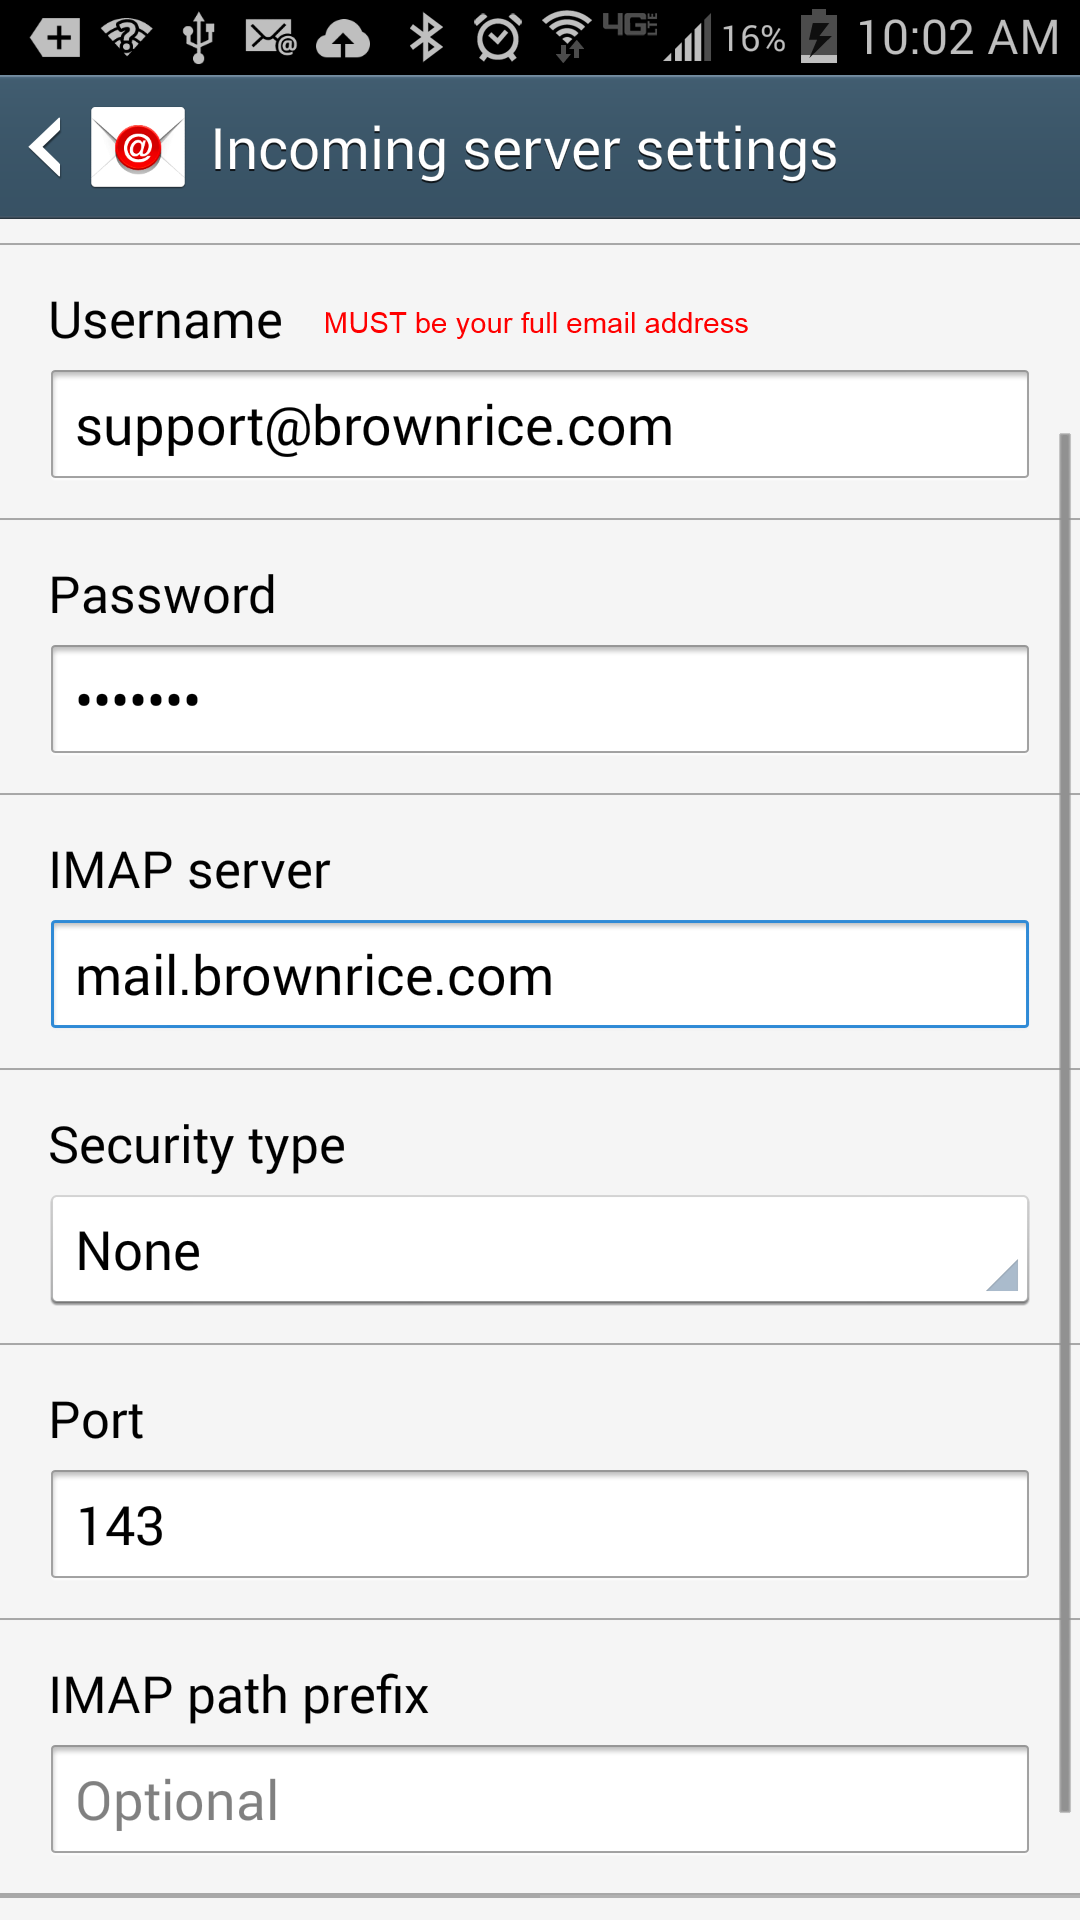 Incoming server settings - IMAP Server: mail.brownrice.com; Port: 143; Security Type: None.